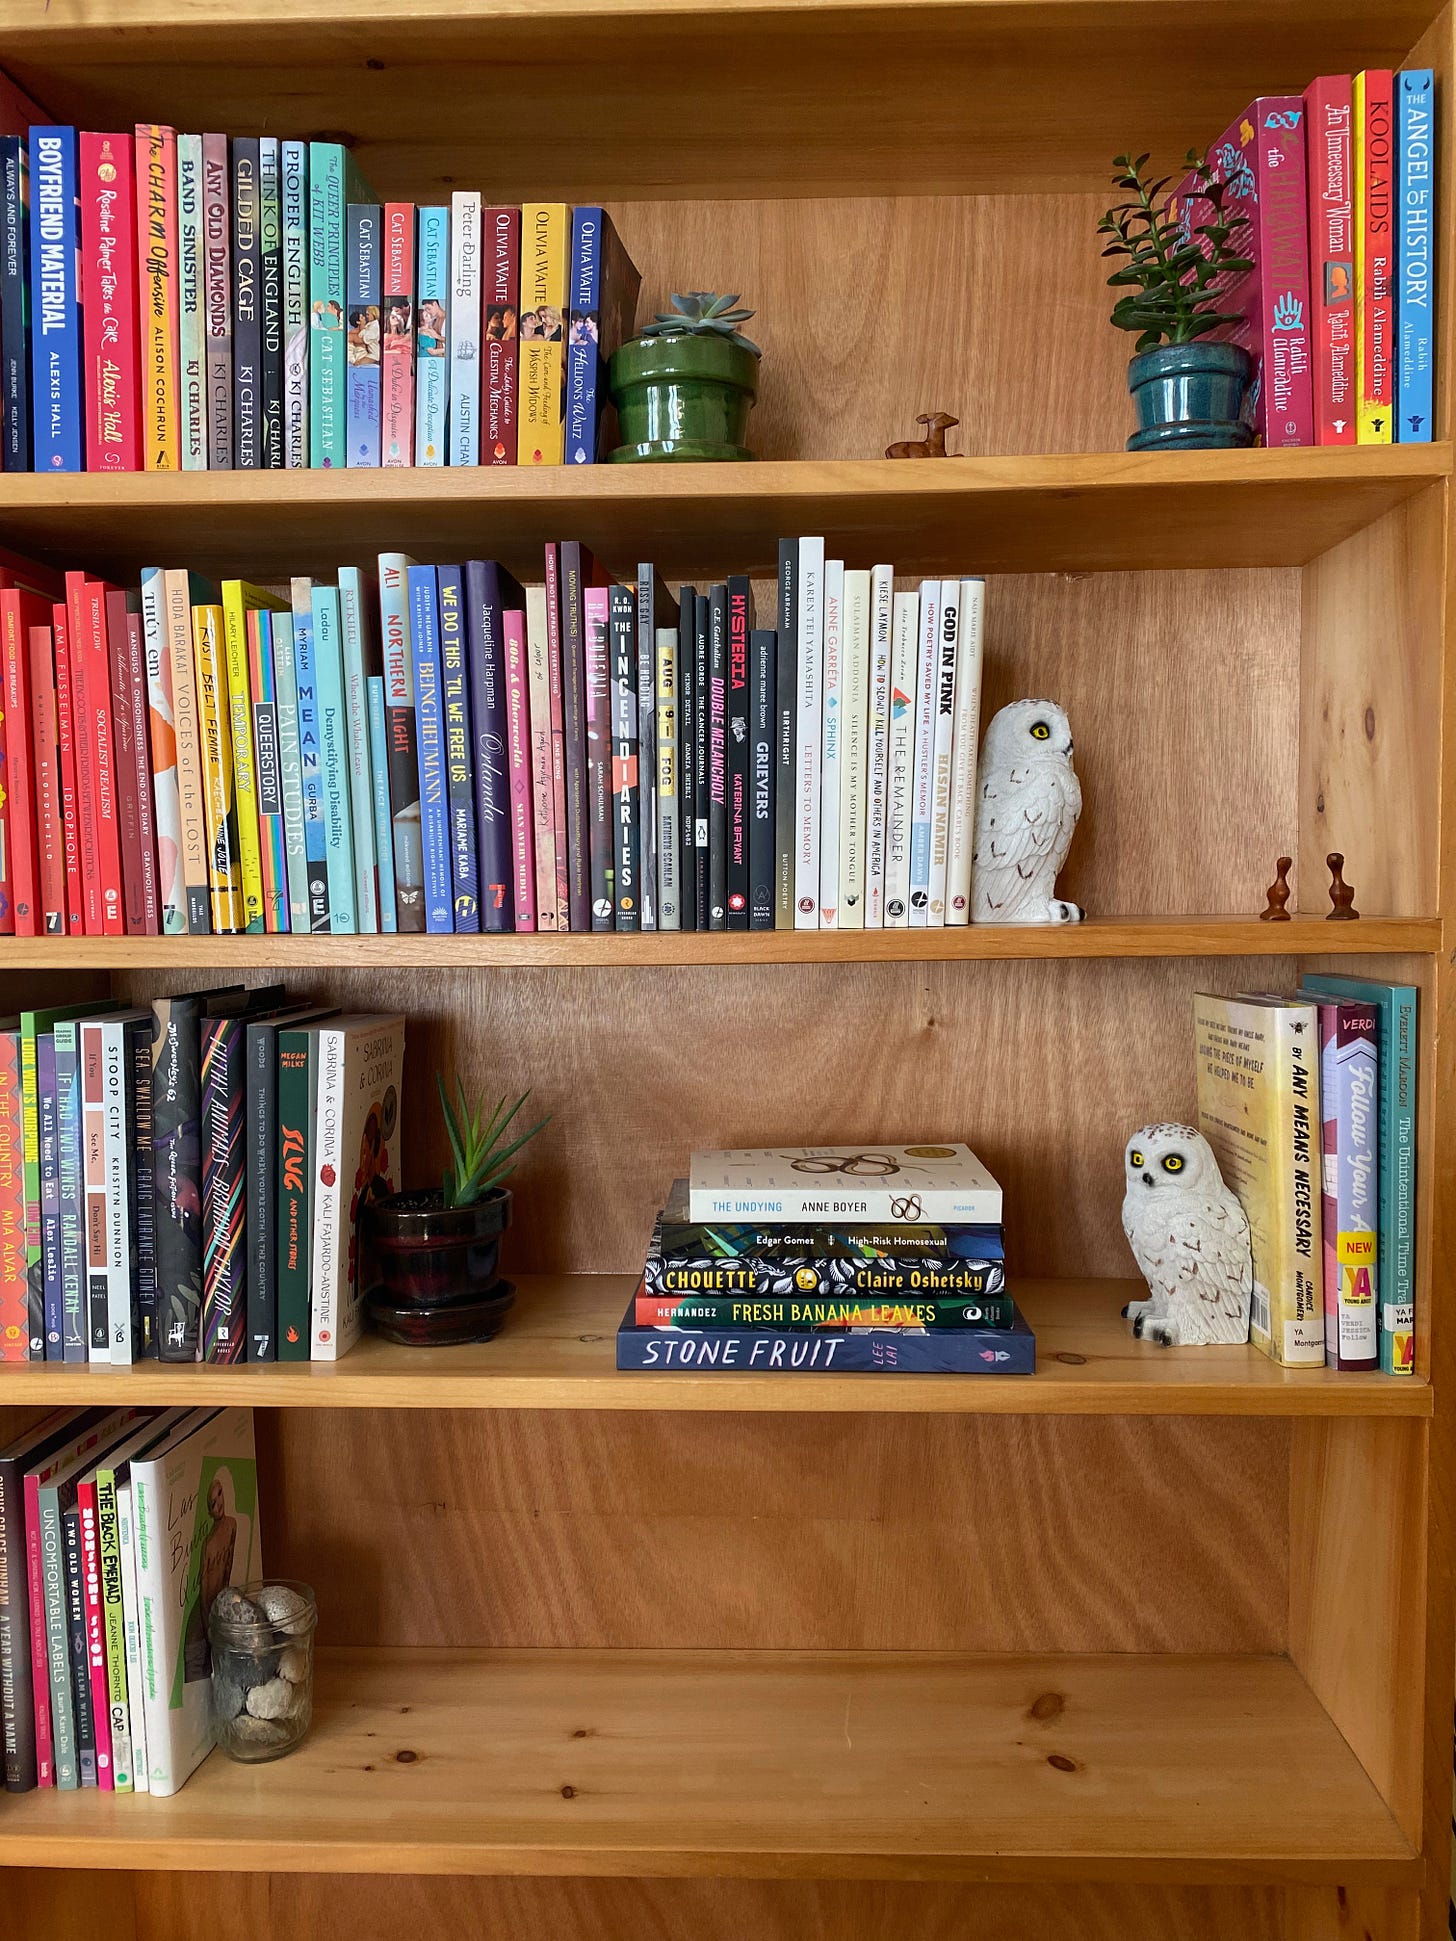 A five-shelved wooden bookcase. Each shelf holds colorful books, but they don’t fill up all the space. Several small succulents in bright pots act as bookends, as do a pair snowy owl figurines and a glass jar full of stones. Small wooden animal figurines sit among the books. 